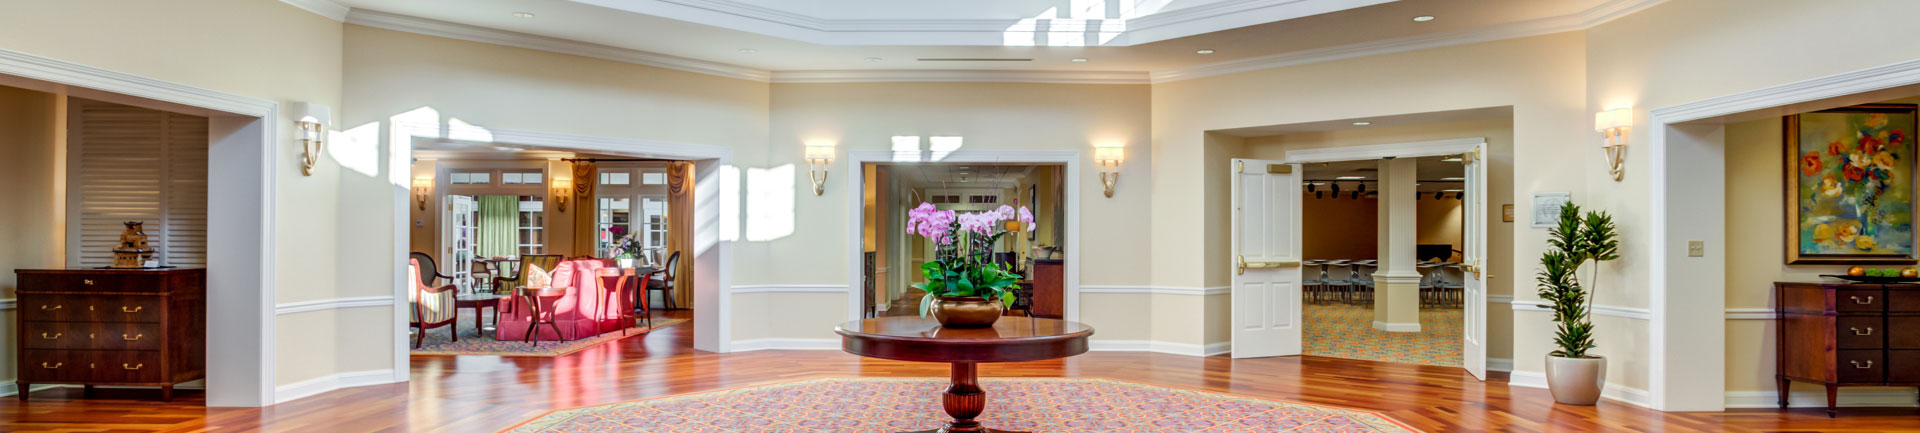 the entryway of a senior living community near chicago